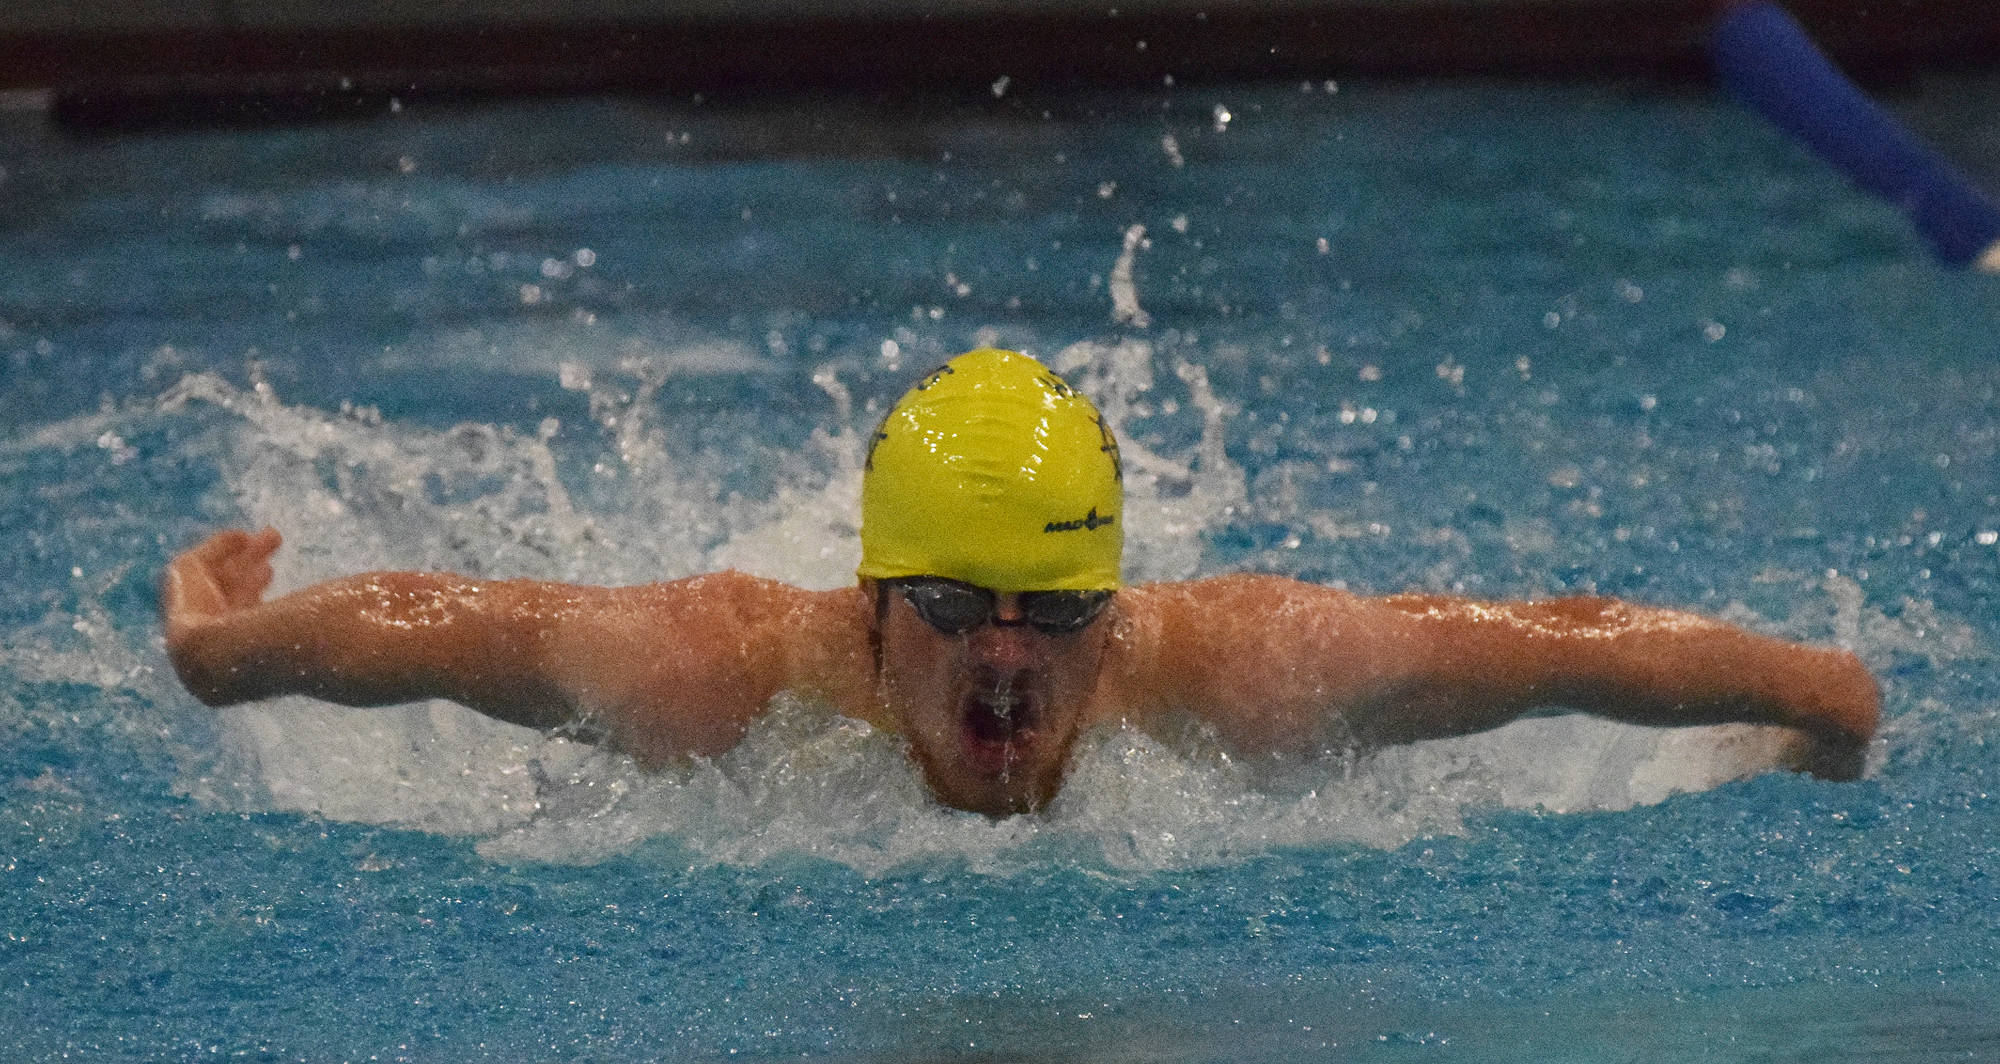 Homer’s Teddy Handley races in the boys 100-yard butterfly event at the SoHi dual meet Friday, Oct. 12, 2018 at Soldotna High School in Soldotna, Alaska. (Photo by Joey Klecka/Peninsula Clarion)